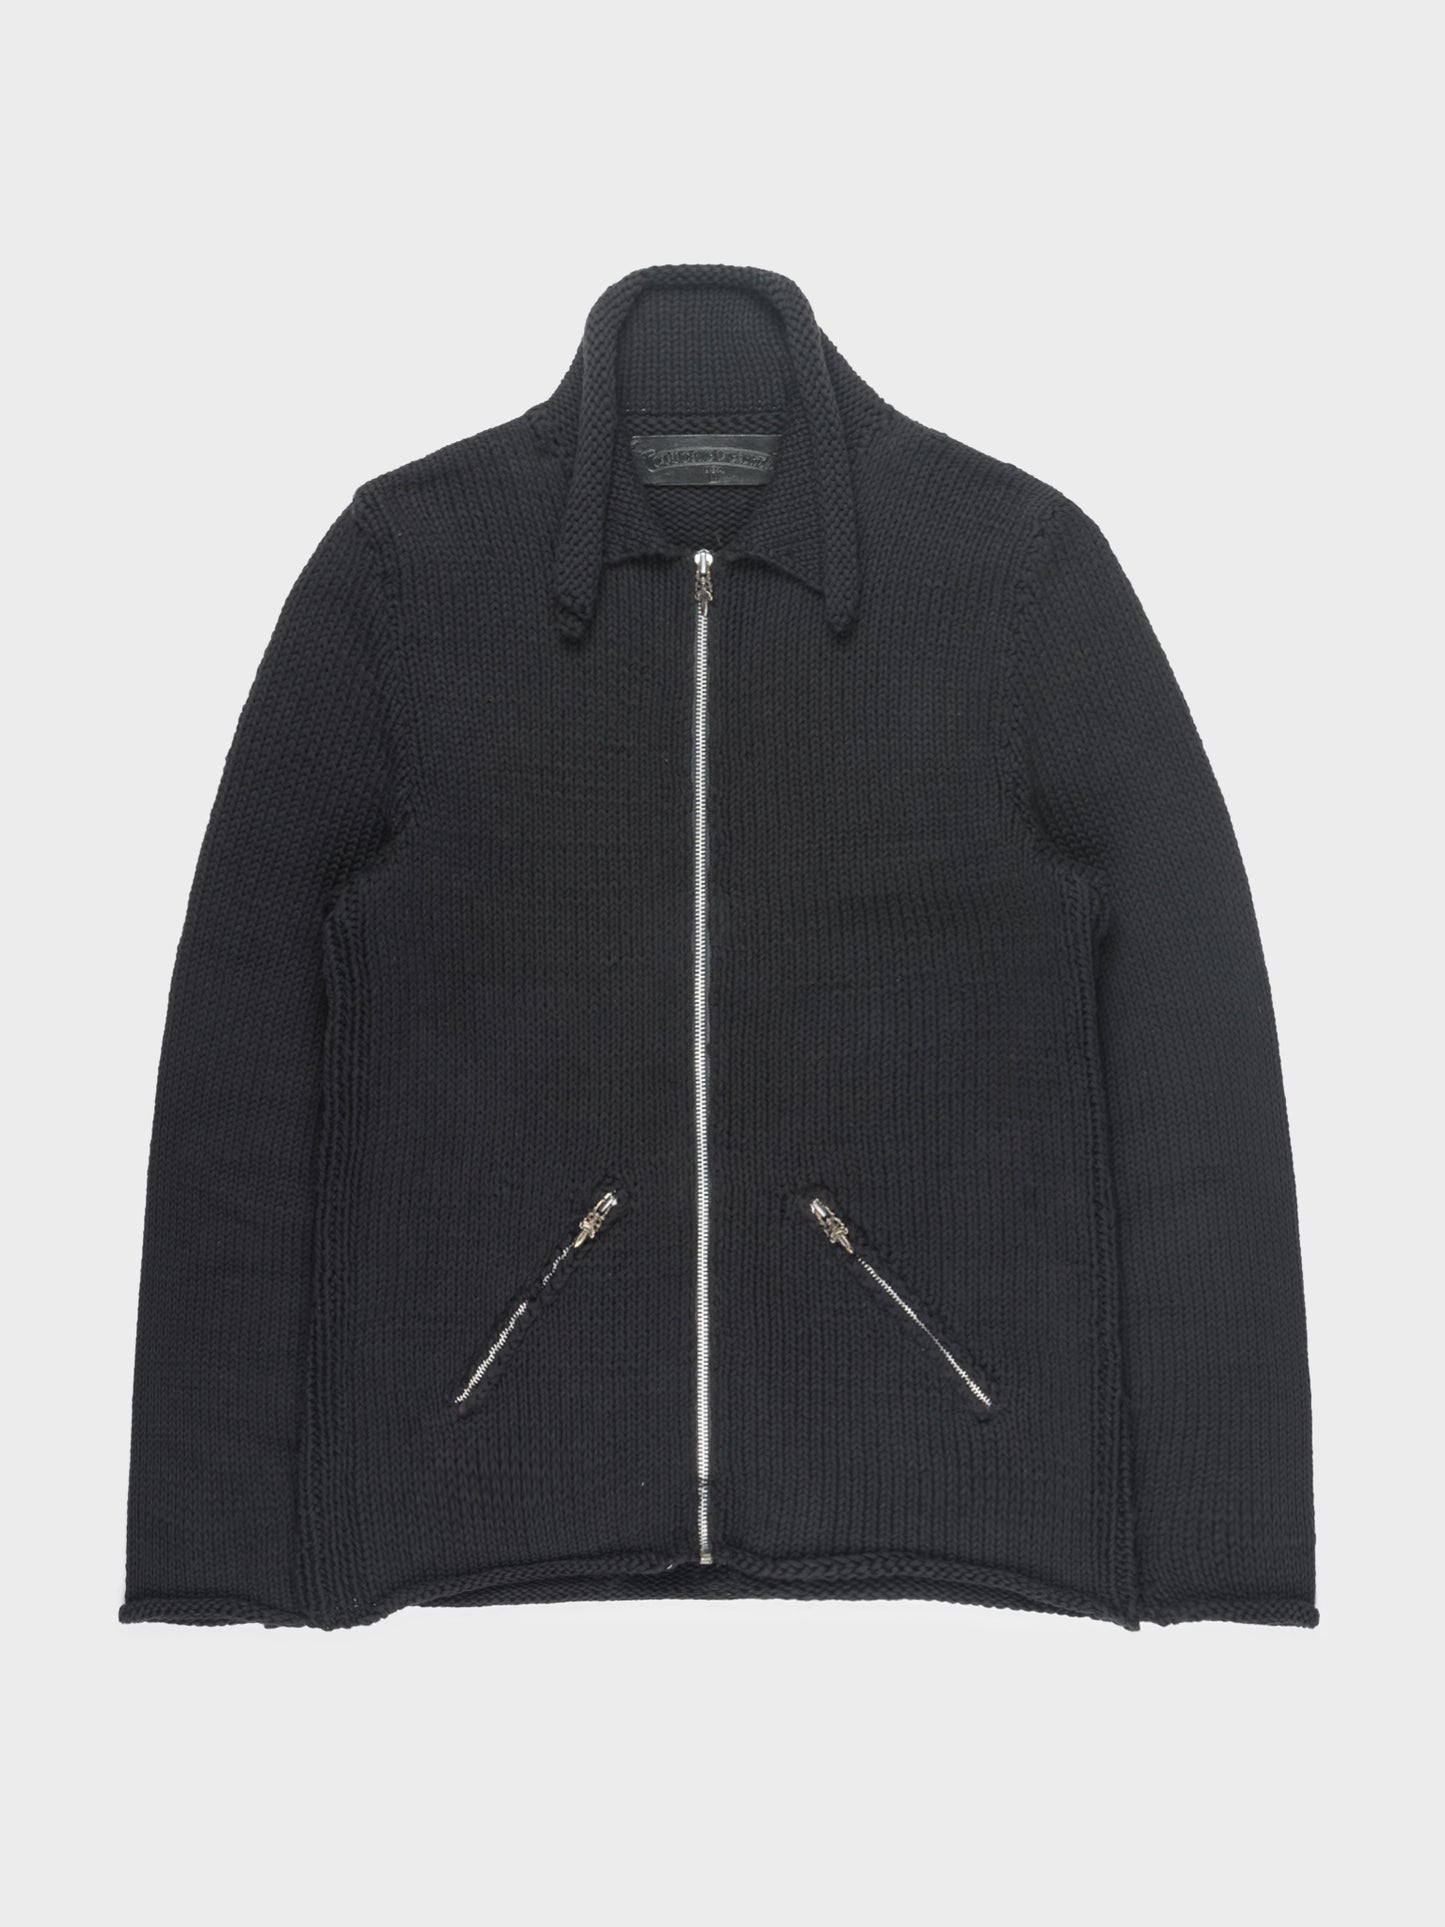 Patched Zip Up Cardigan